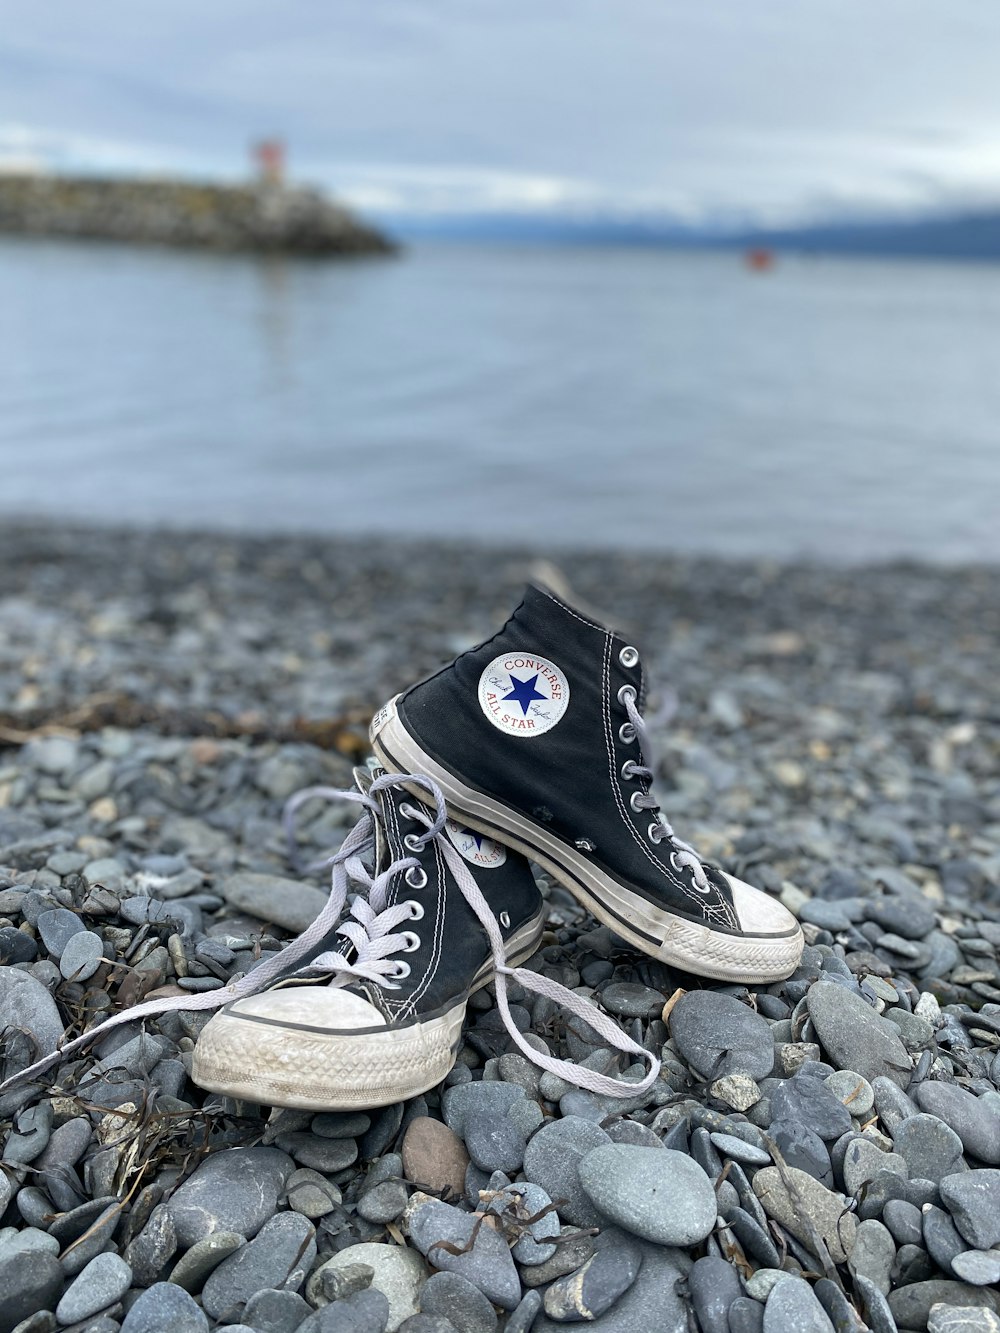 black converse all star high top sneakers on rocky shore photo – Free  Converse Image on Unsplash